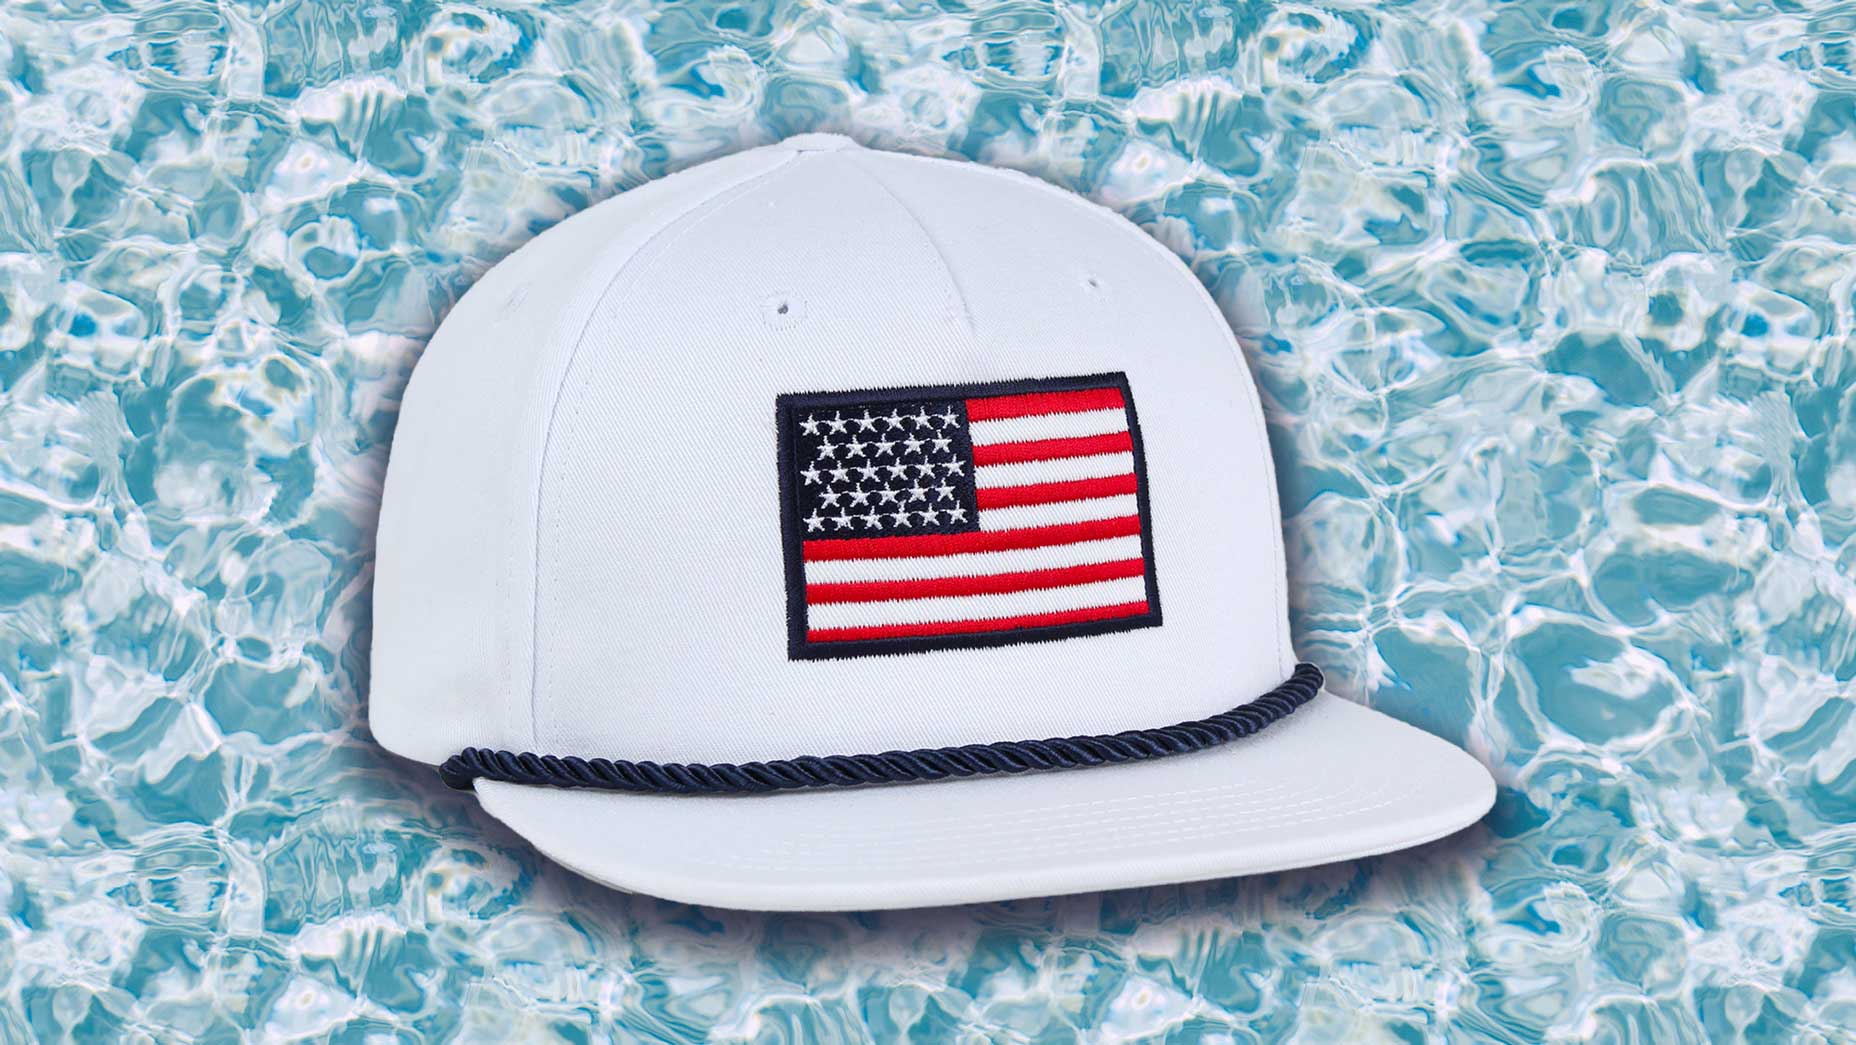 This American flag rope hat is a summertime staple